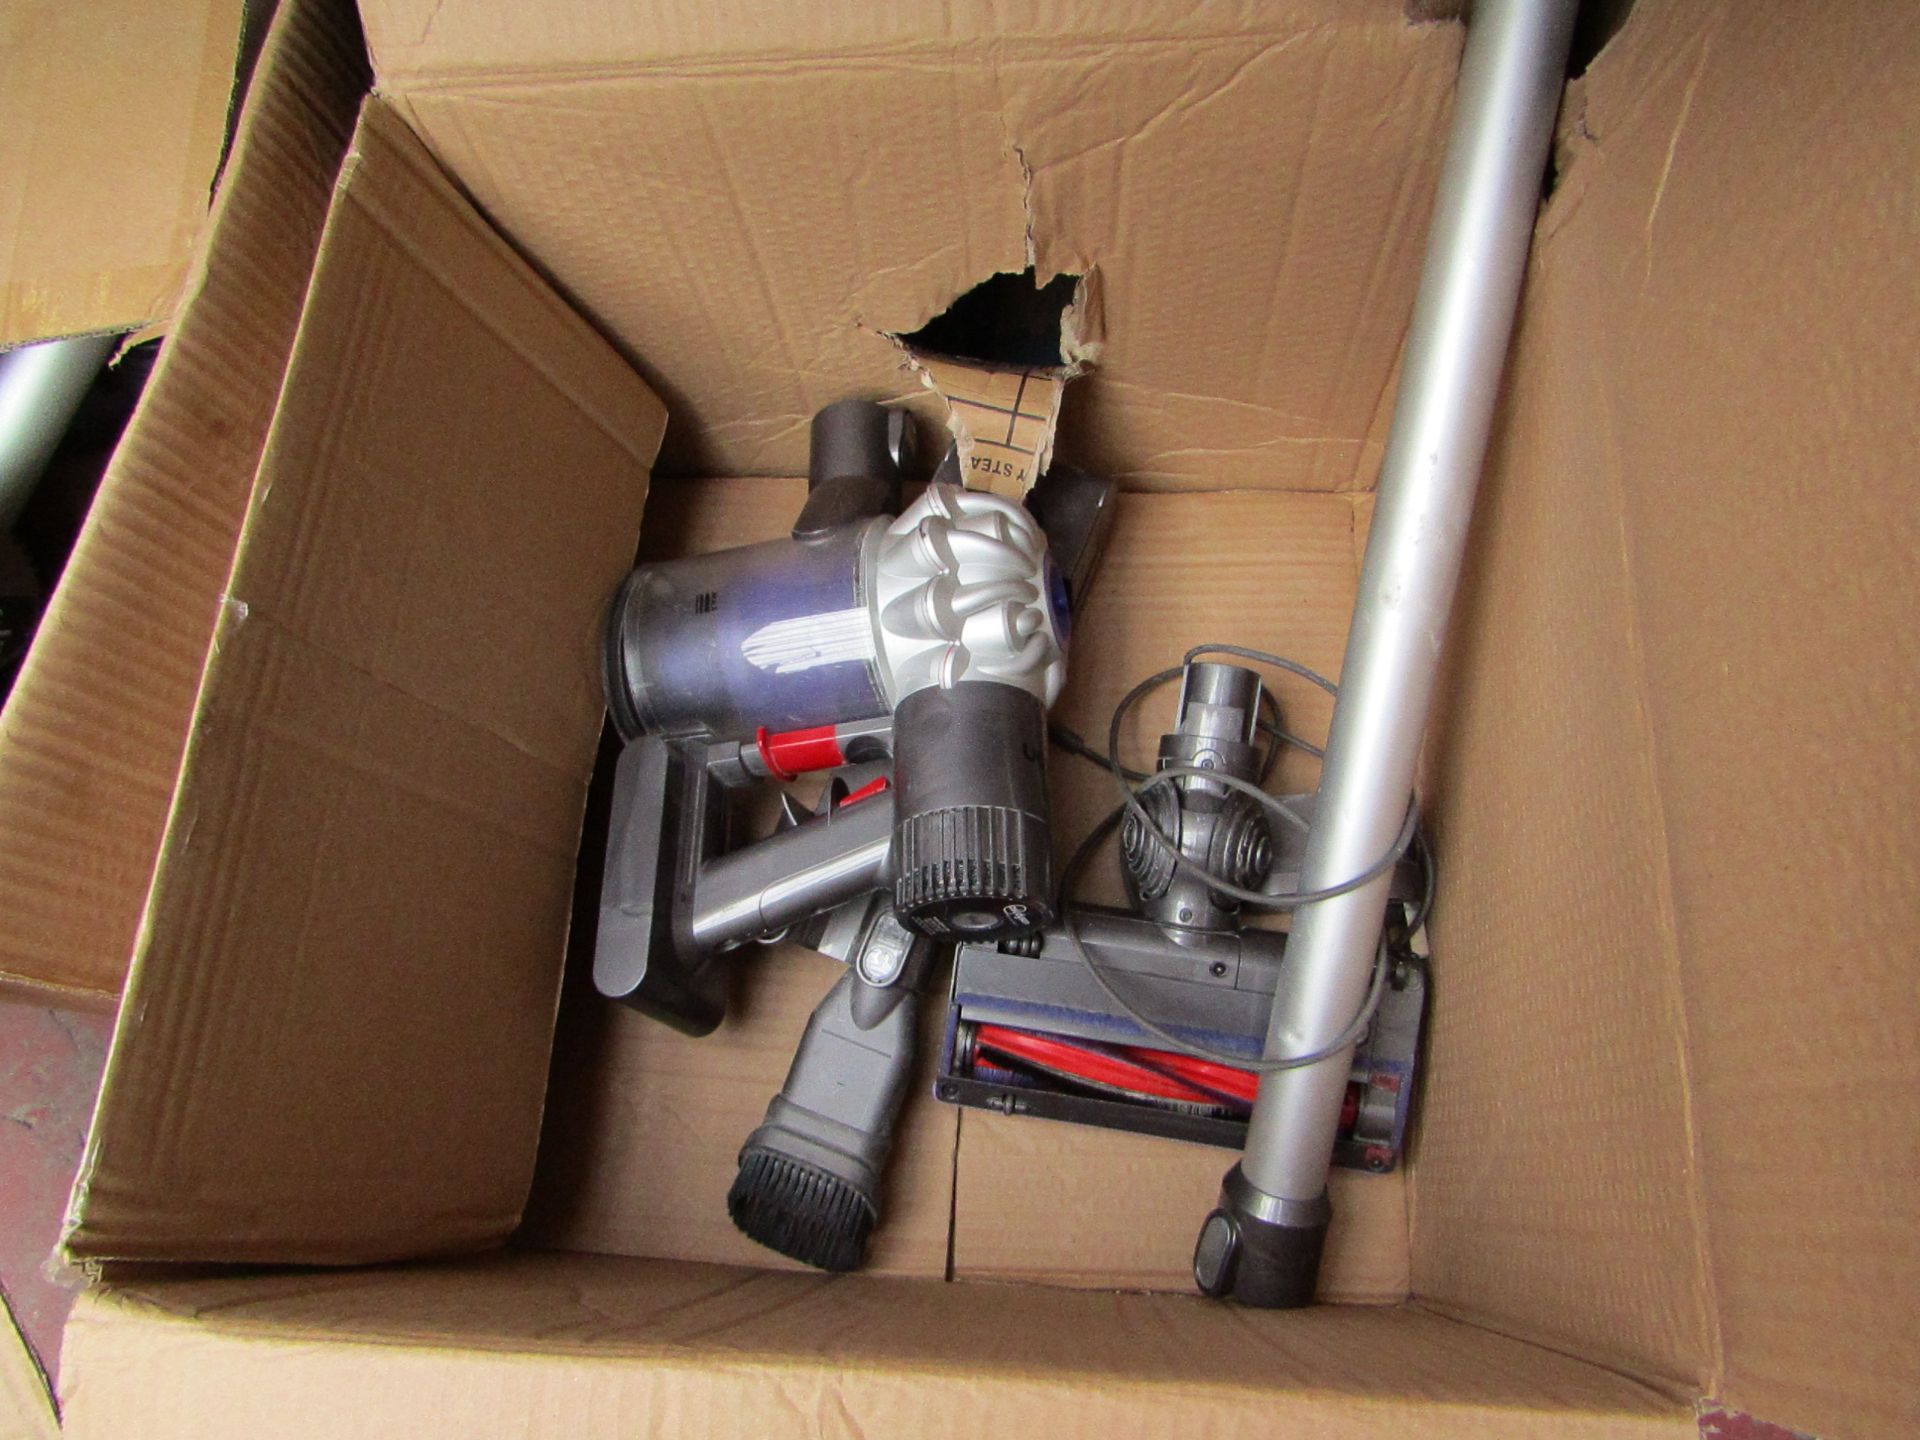 Dyson SV03 Cordless Vacuum Cleaner, main unit is tested working in used condition but the filter